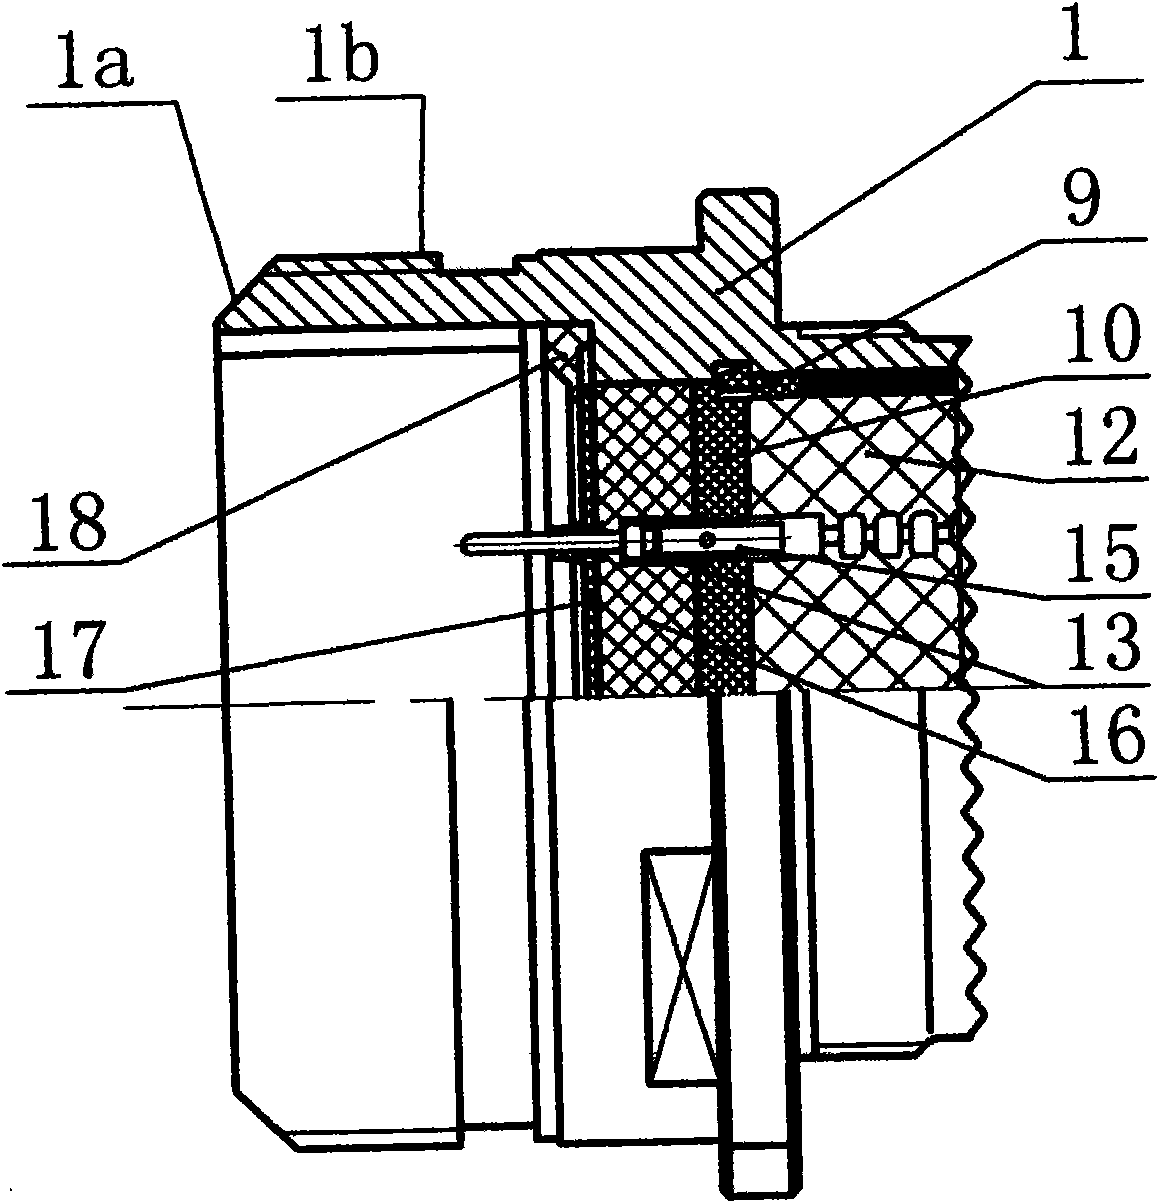 Electric connector resisting nuclear electromagnetic pulses